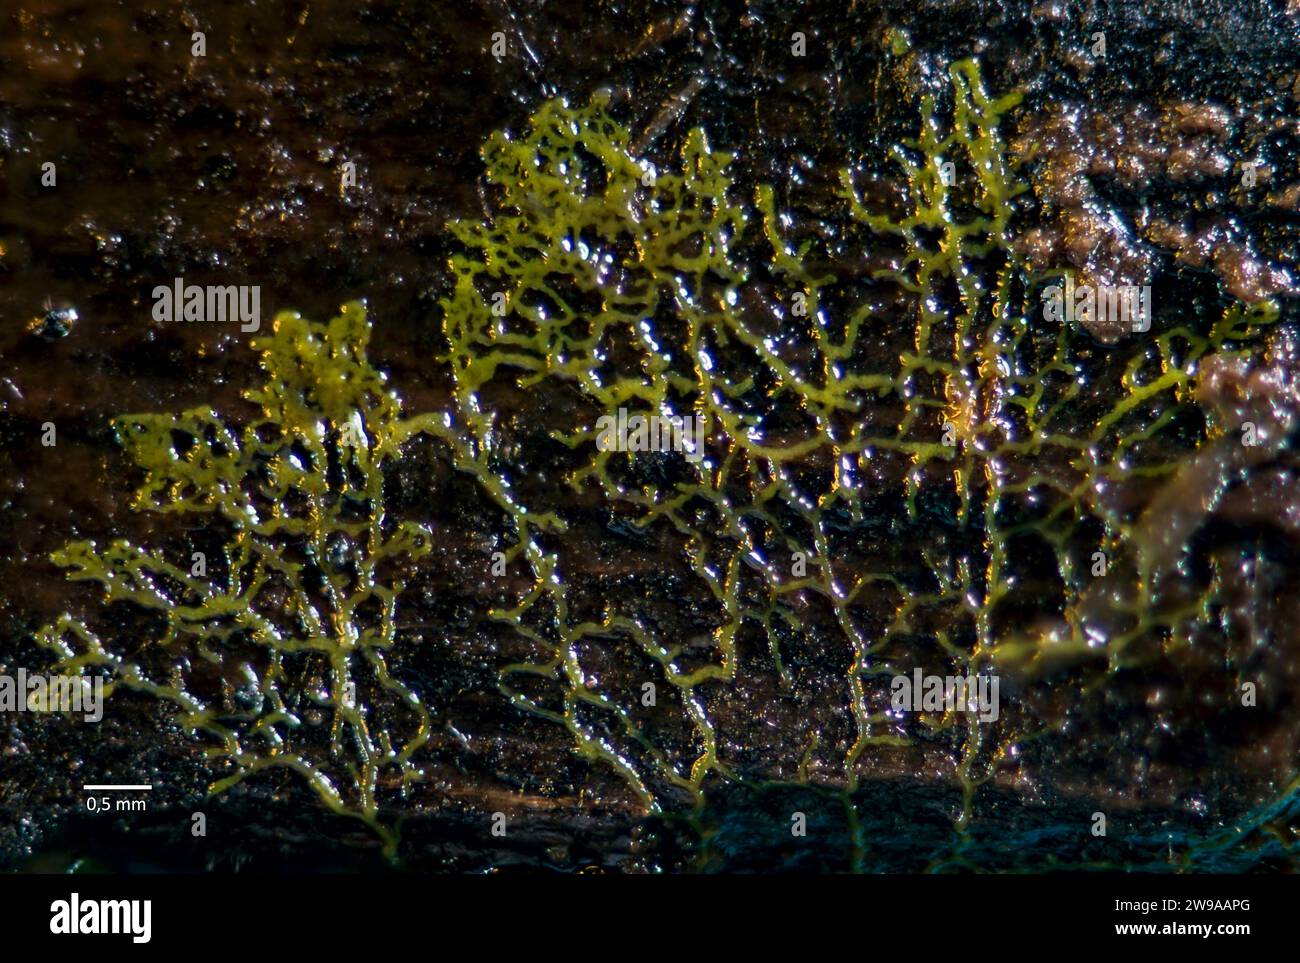 Plasmodium of slime mould (Badhamia sp.?) growing on a fungus decaying on an old tree collected in south-western Norway. Stock Photo